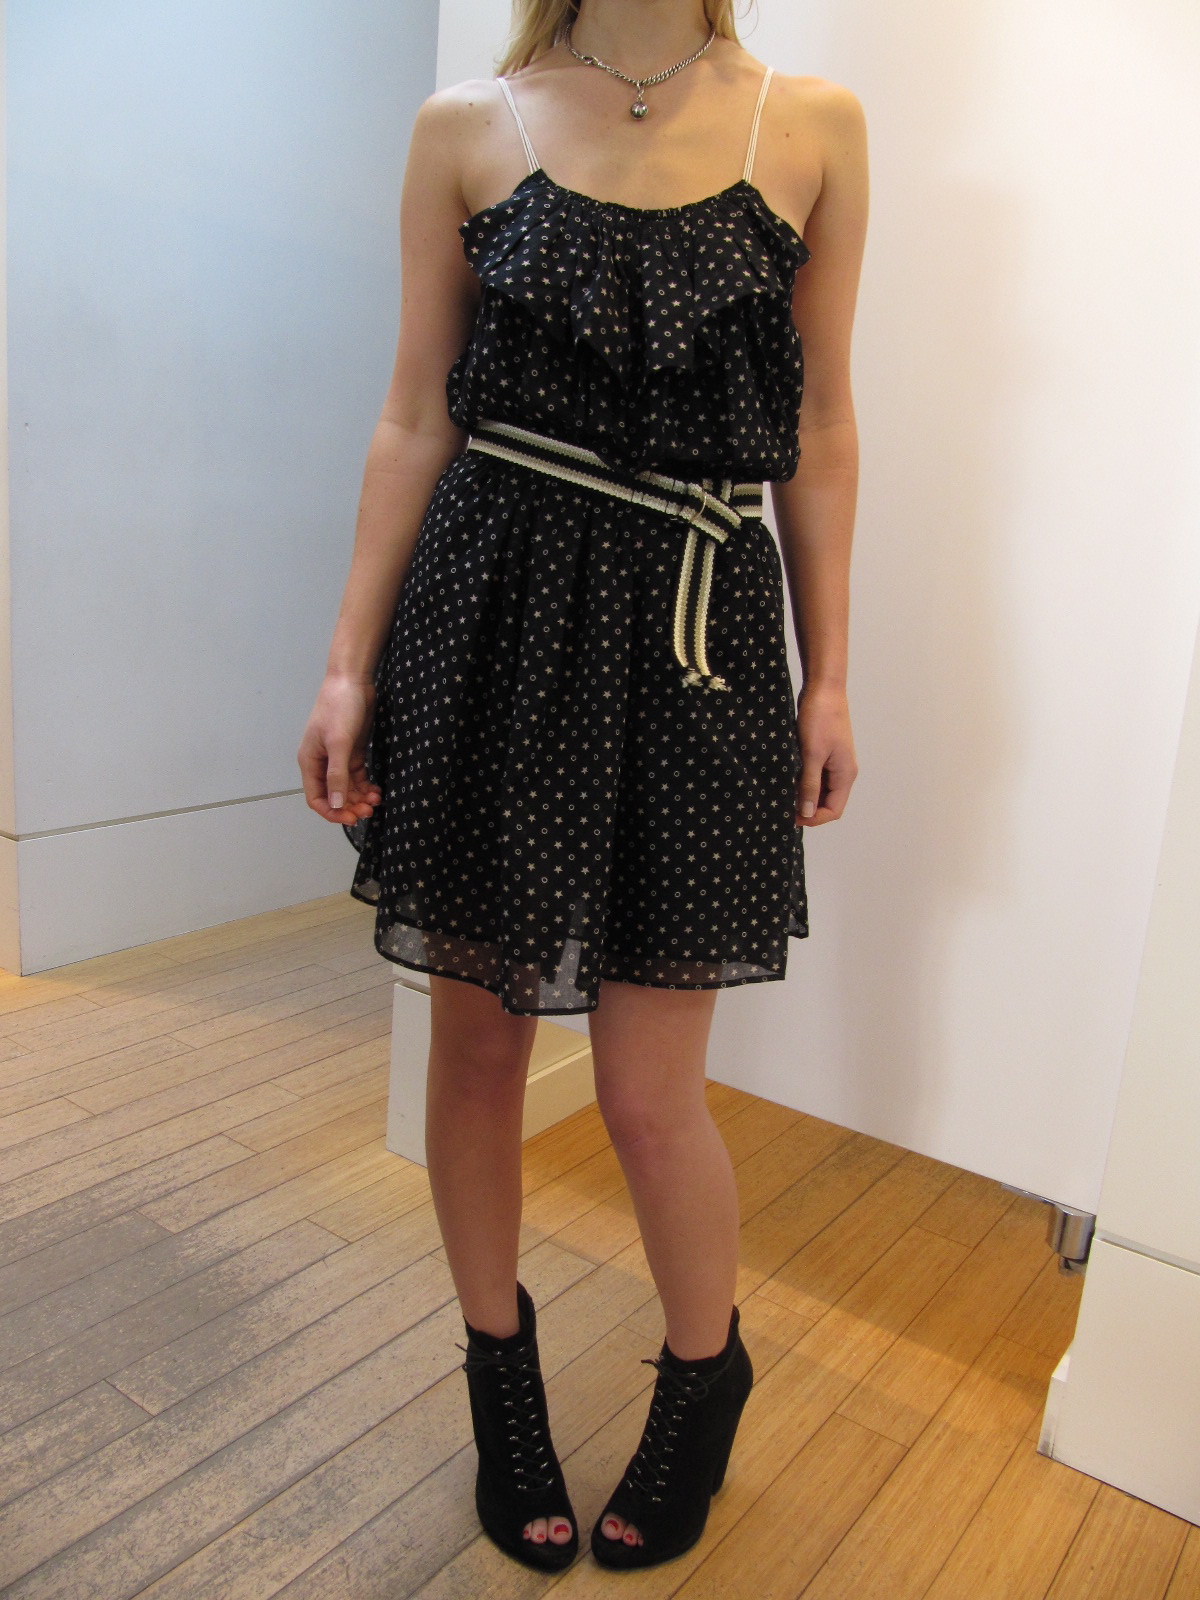 misch blog - new arrivals - events - holiday hours: Isabel Marant: some mainline and more Etoile!!